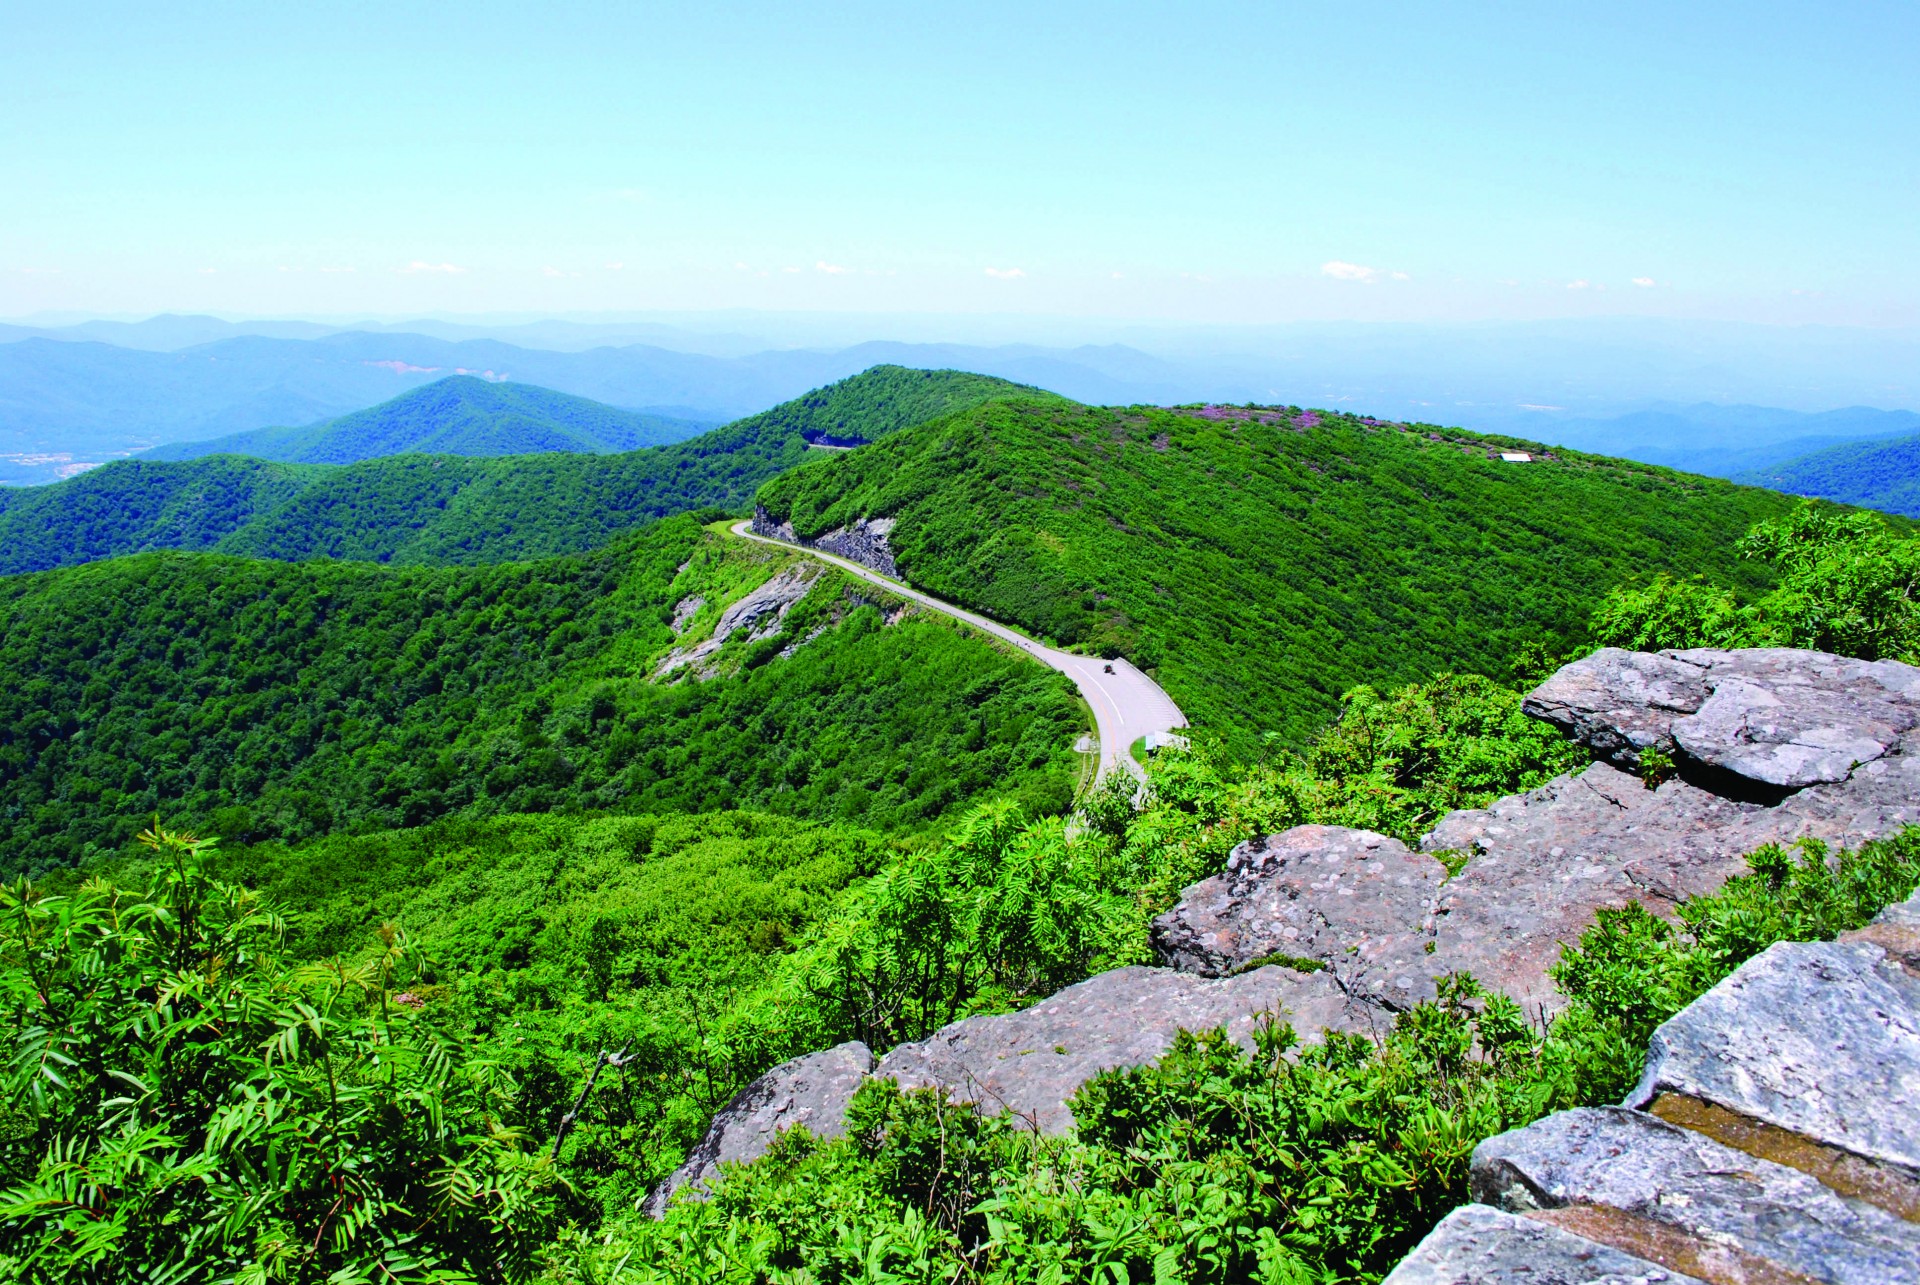 Pavement work will be done near Craggy Gardens and Mount Mitchell